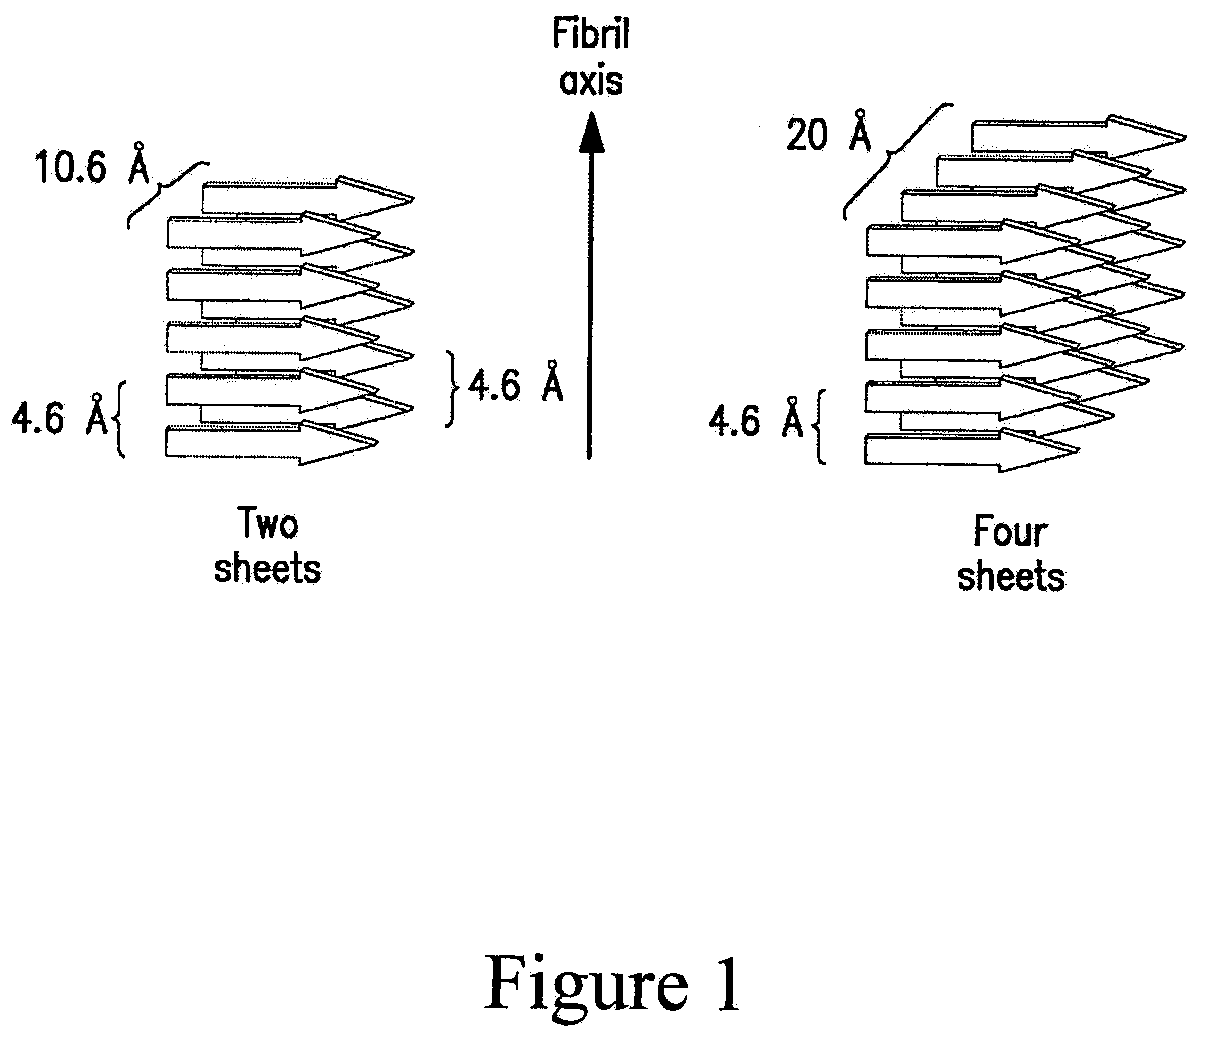 Stabilizing alkylglycoside compositions and methods thereof